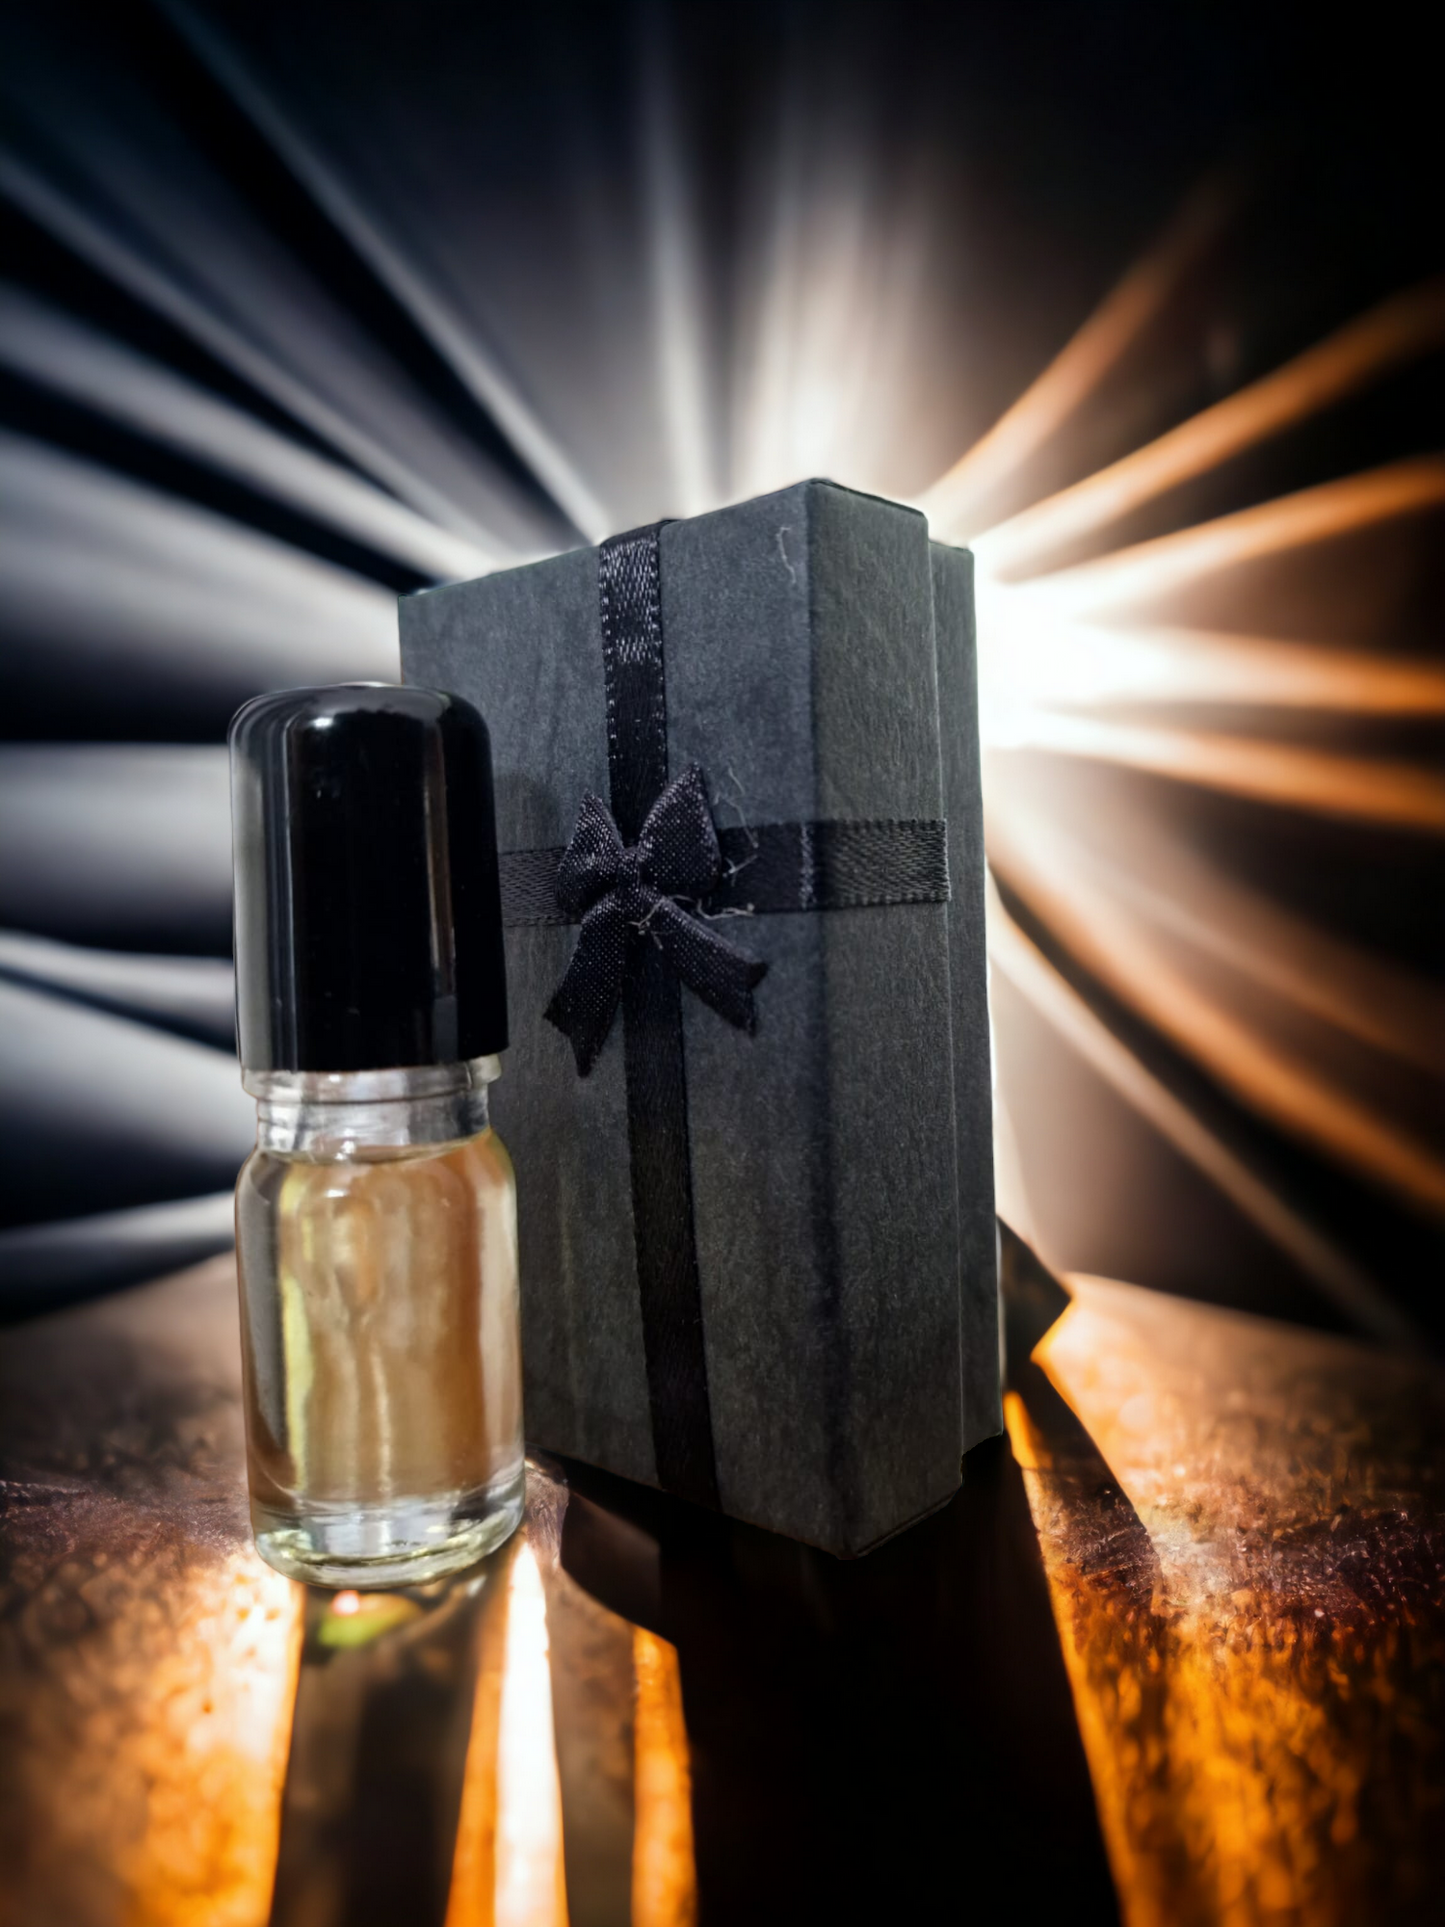 Blend No.4 Poison by Livfragrance® Pure Oud Oil - Inspired by Dior - Pure Poison